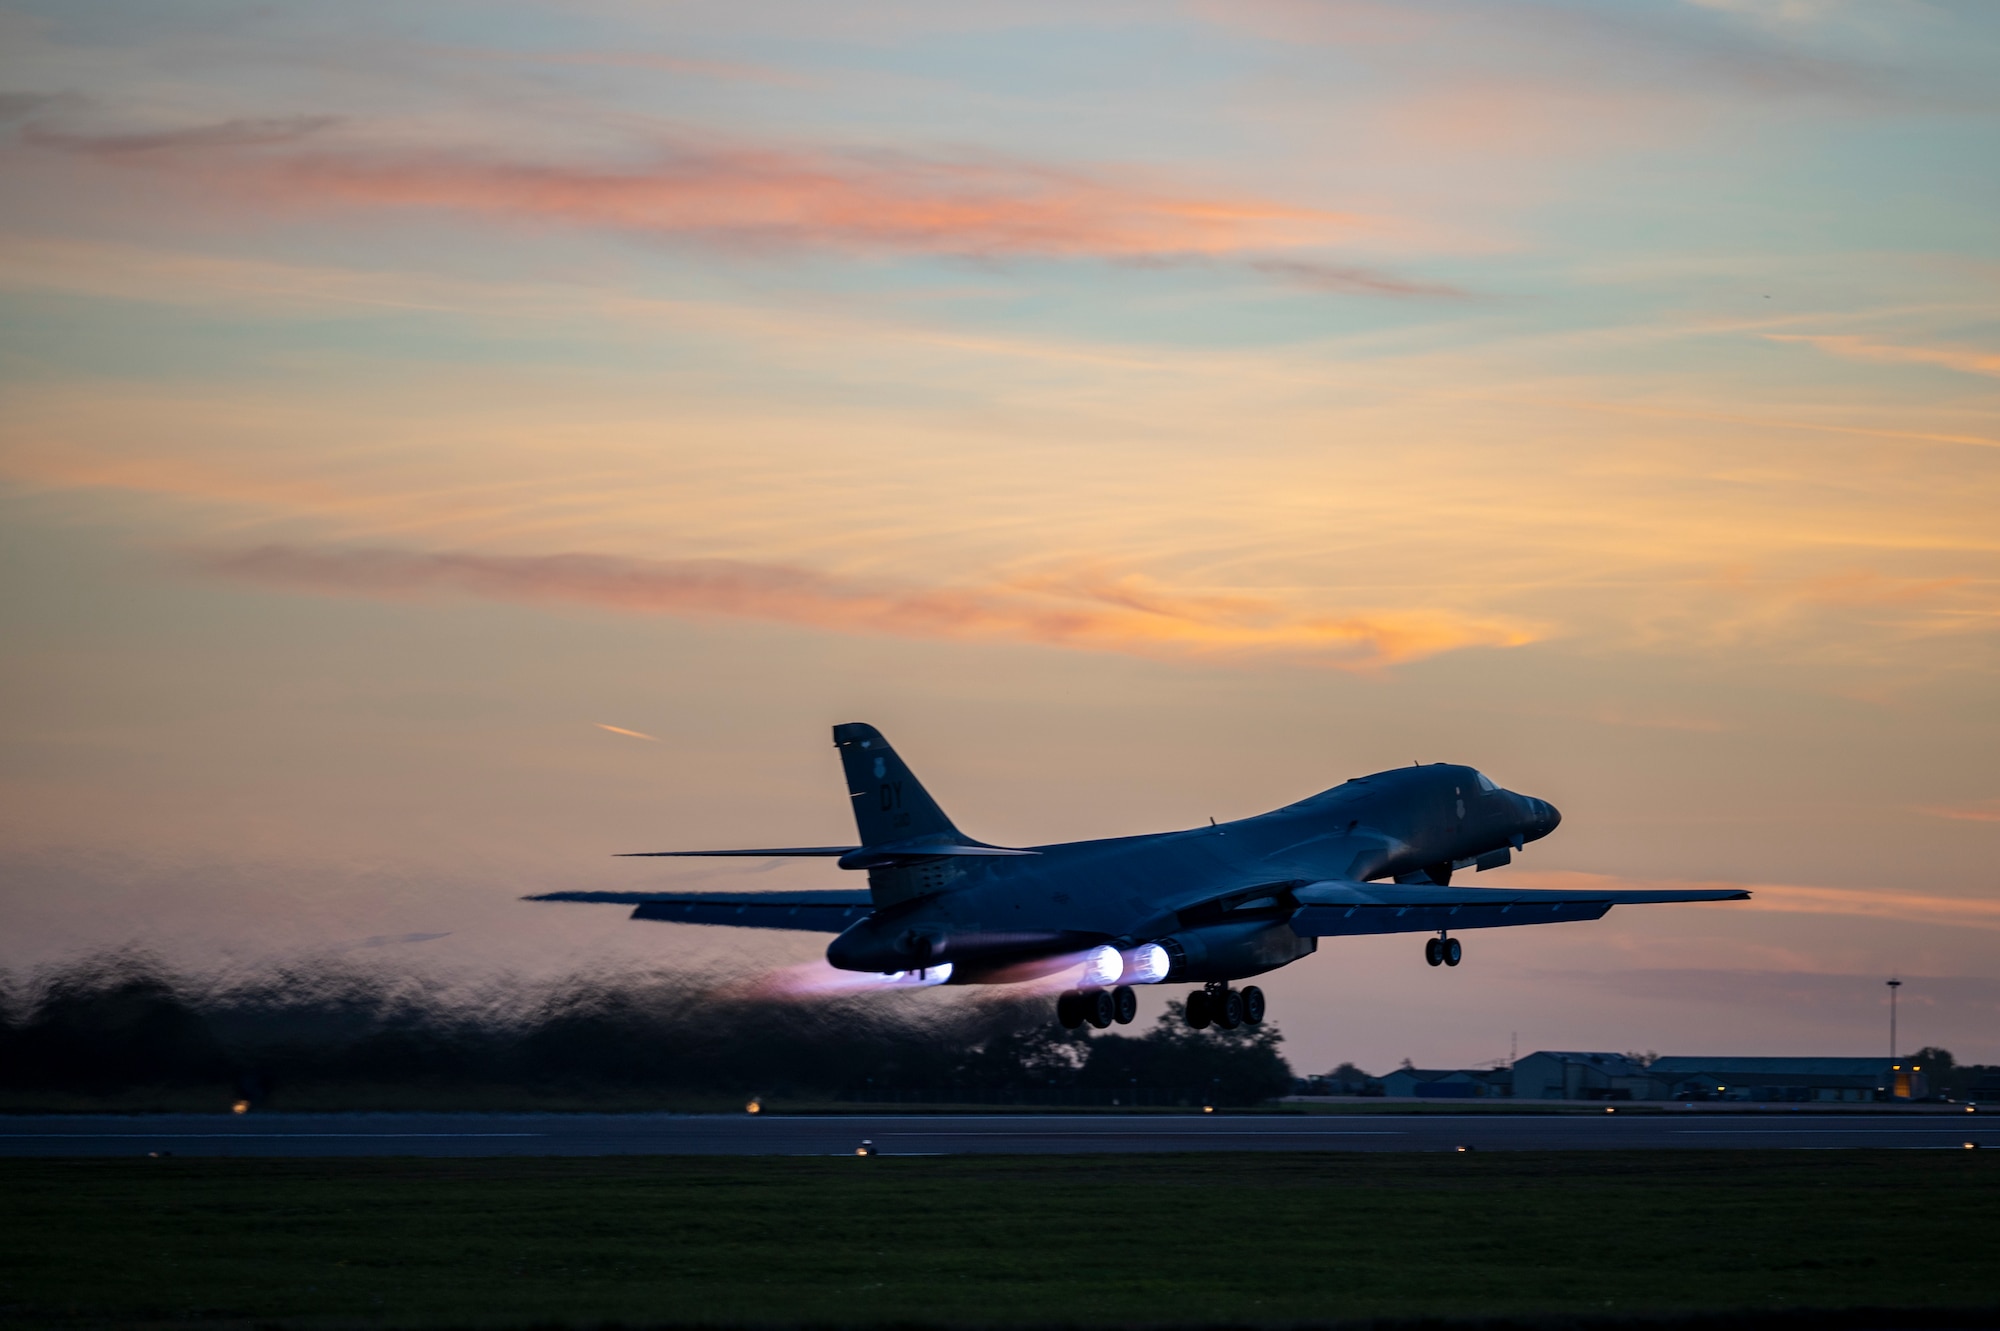 A B-1B Lancer assigned to the 9th Expeditionary Bomb Squadron takes off at RAF Fairford, United Kingdom, Oct. 11, 2021. The 9th EBS conducted a Bomber Task Force training mission where they utilized Agile Combat Employment through the execution of a hot pit refueling at Spangdahlem Air Base, Germany after integrating with allied Joint Terminal Attack Controllers during a routine weapons training in the Baltic Sea region. (U.S. Air Force photo by Senior Airman Colin Hollowell)